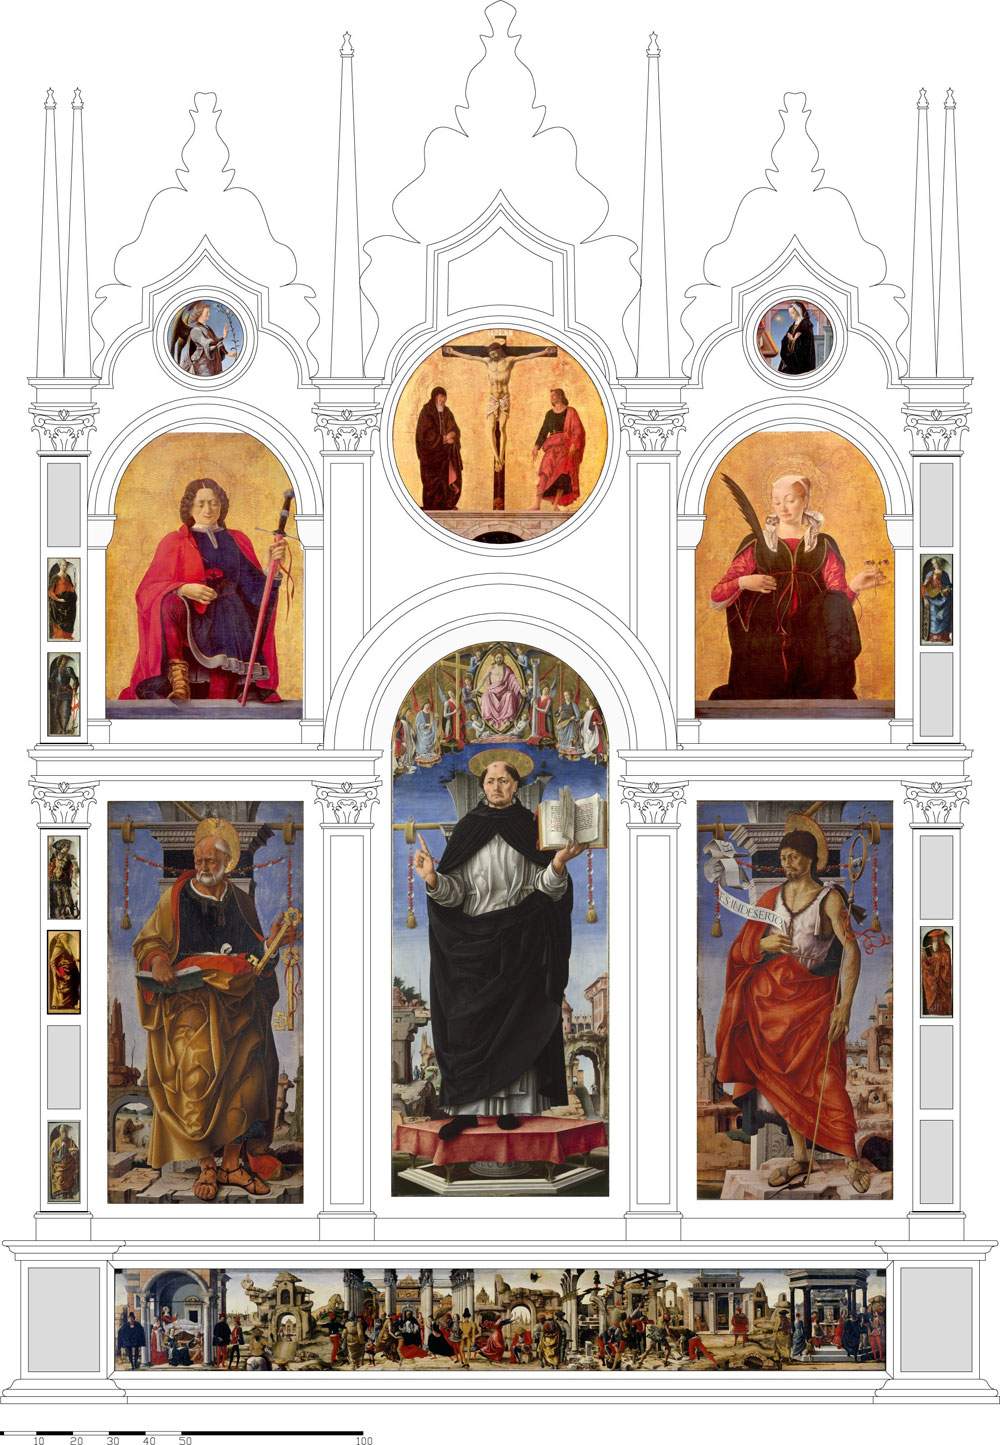 The Griffoni Polyptych will (finally) be seen live. Meanwhile, Sky Arte is dedicating a special